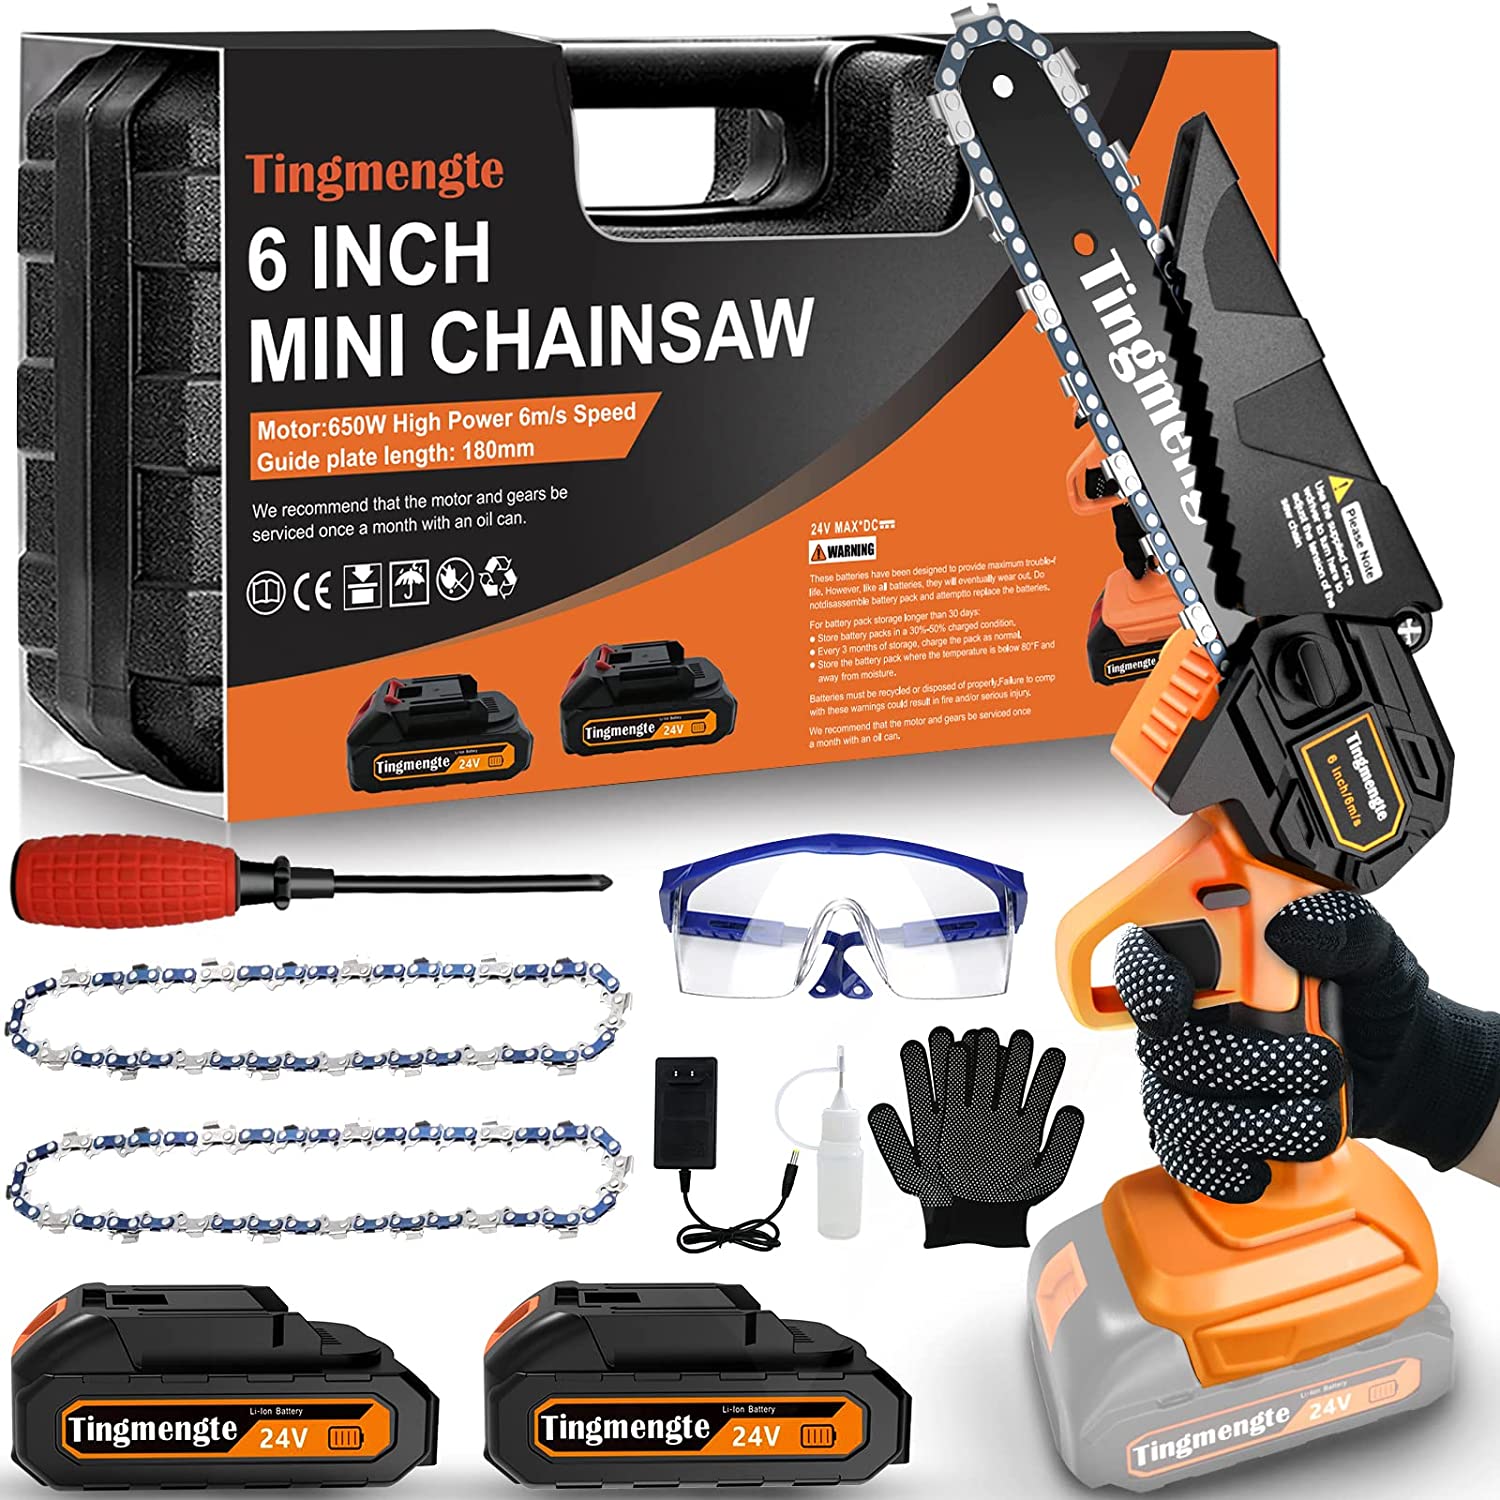 Mini Chainsaw 6 Inch, Cordless Mini Chainsaw Battery Powered with 24V 10000mAh Rechargeable Battery, 2.57Lb One-Hand Use Electric Chainsaw, Handheld Chainsaw for Tree Trimming Wood Cutting